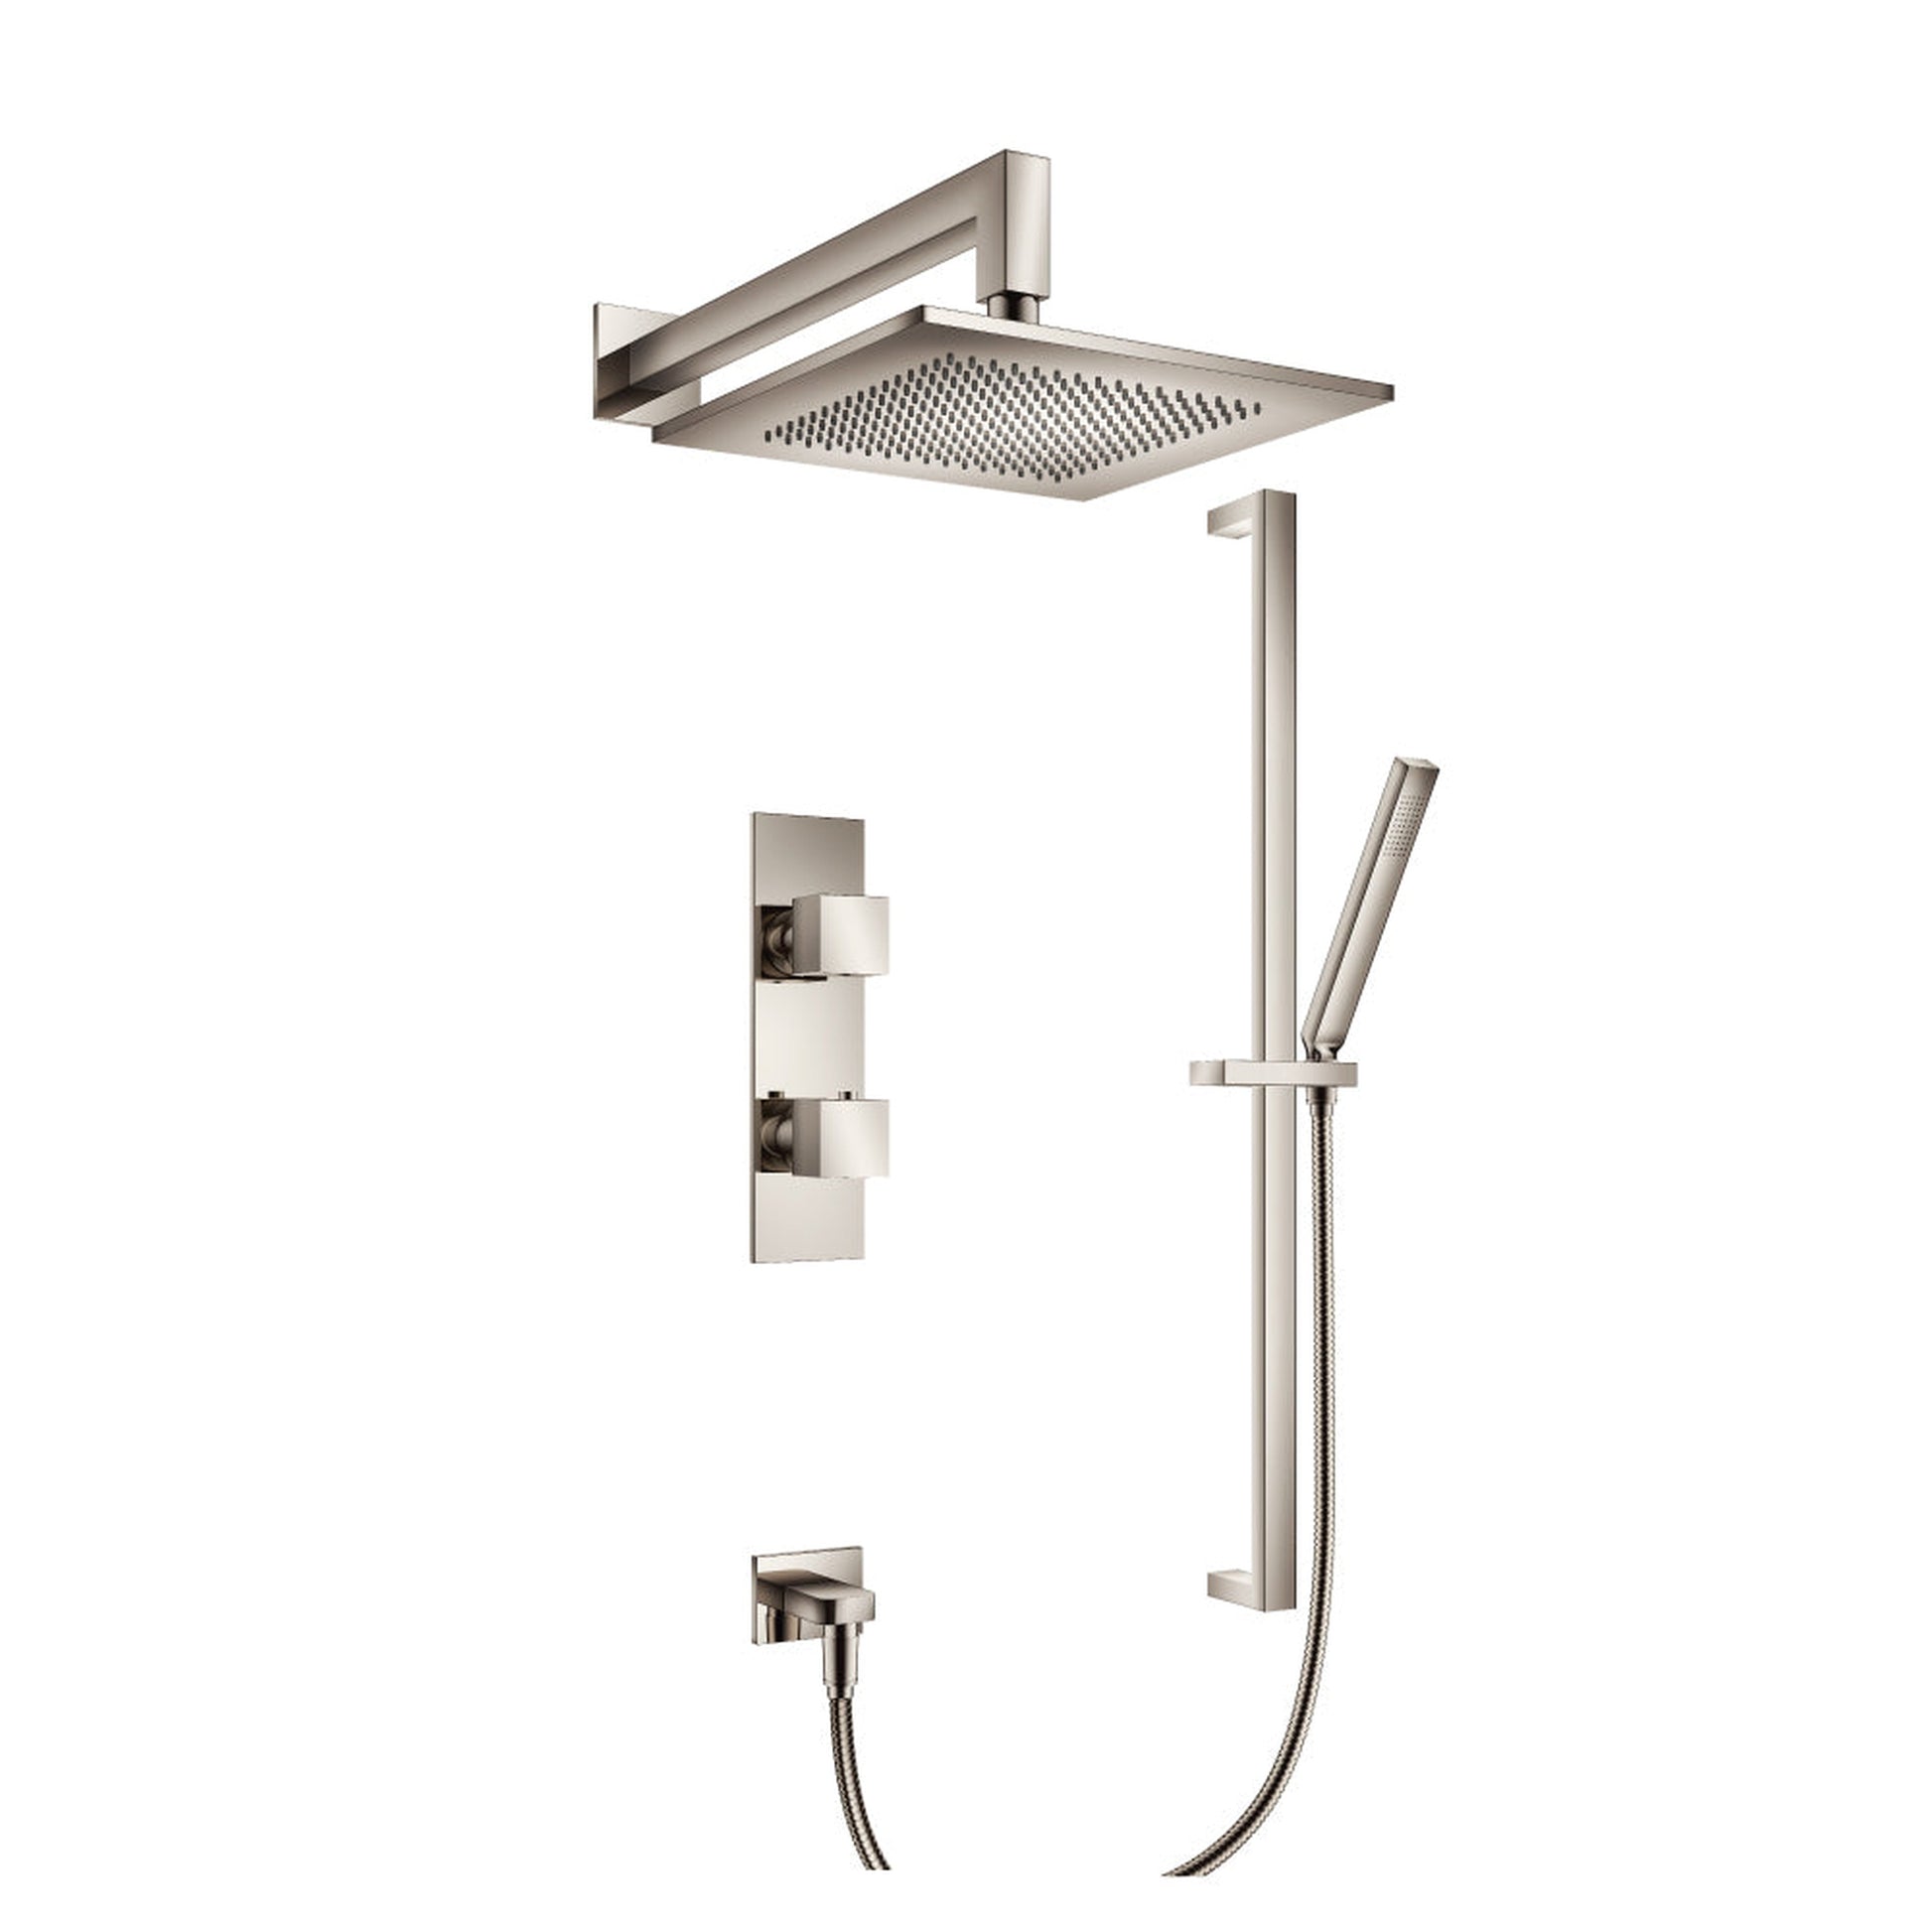 Isenberg Serie 160 Two Output Shower Set With Shower Head, Hand Held and Slide Bar in Polished Nickel (160.7300PN)